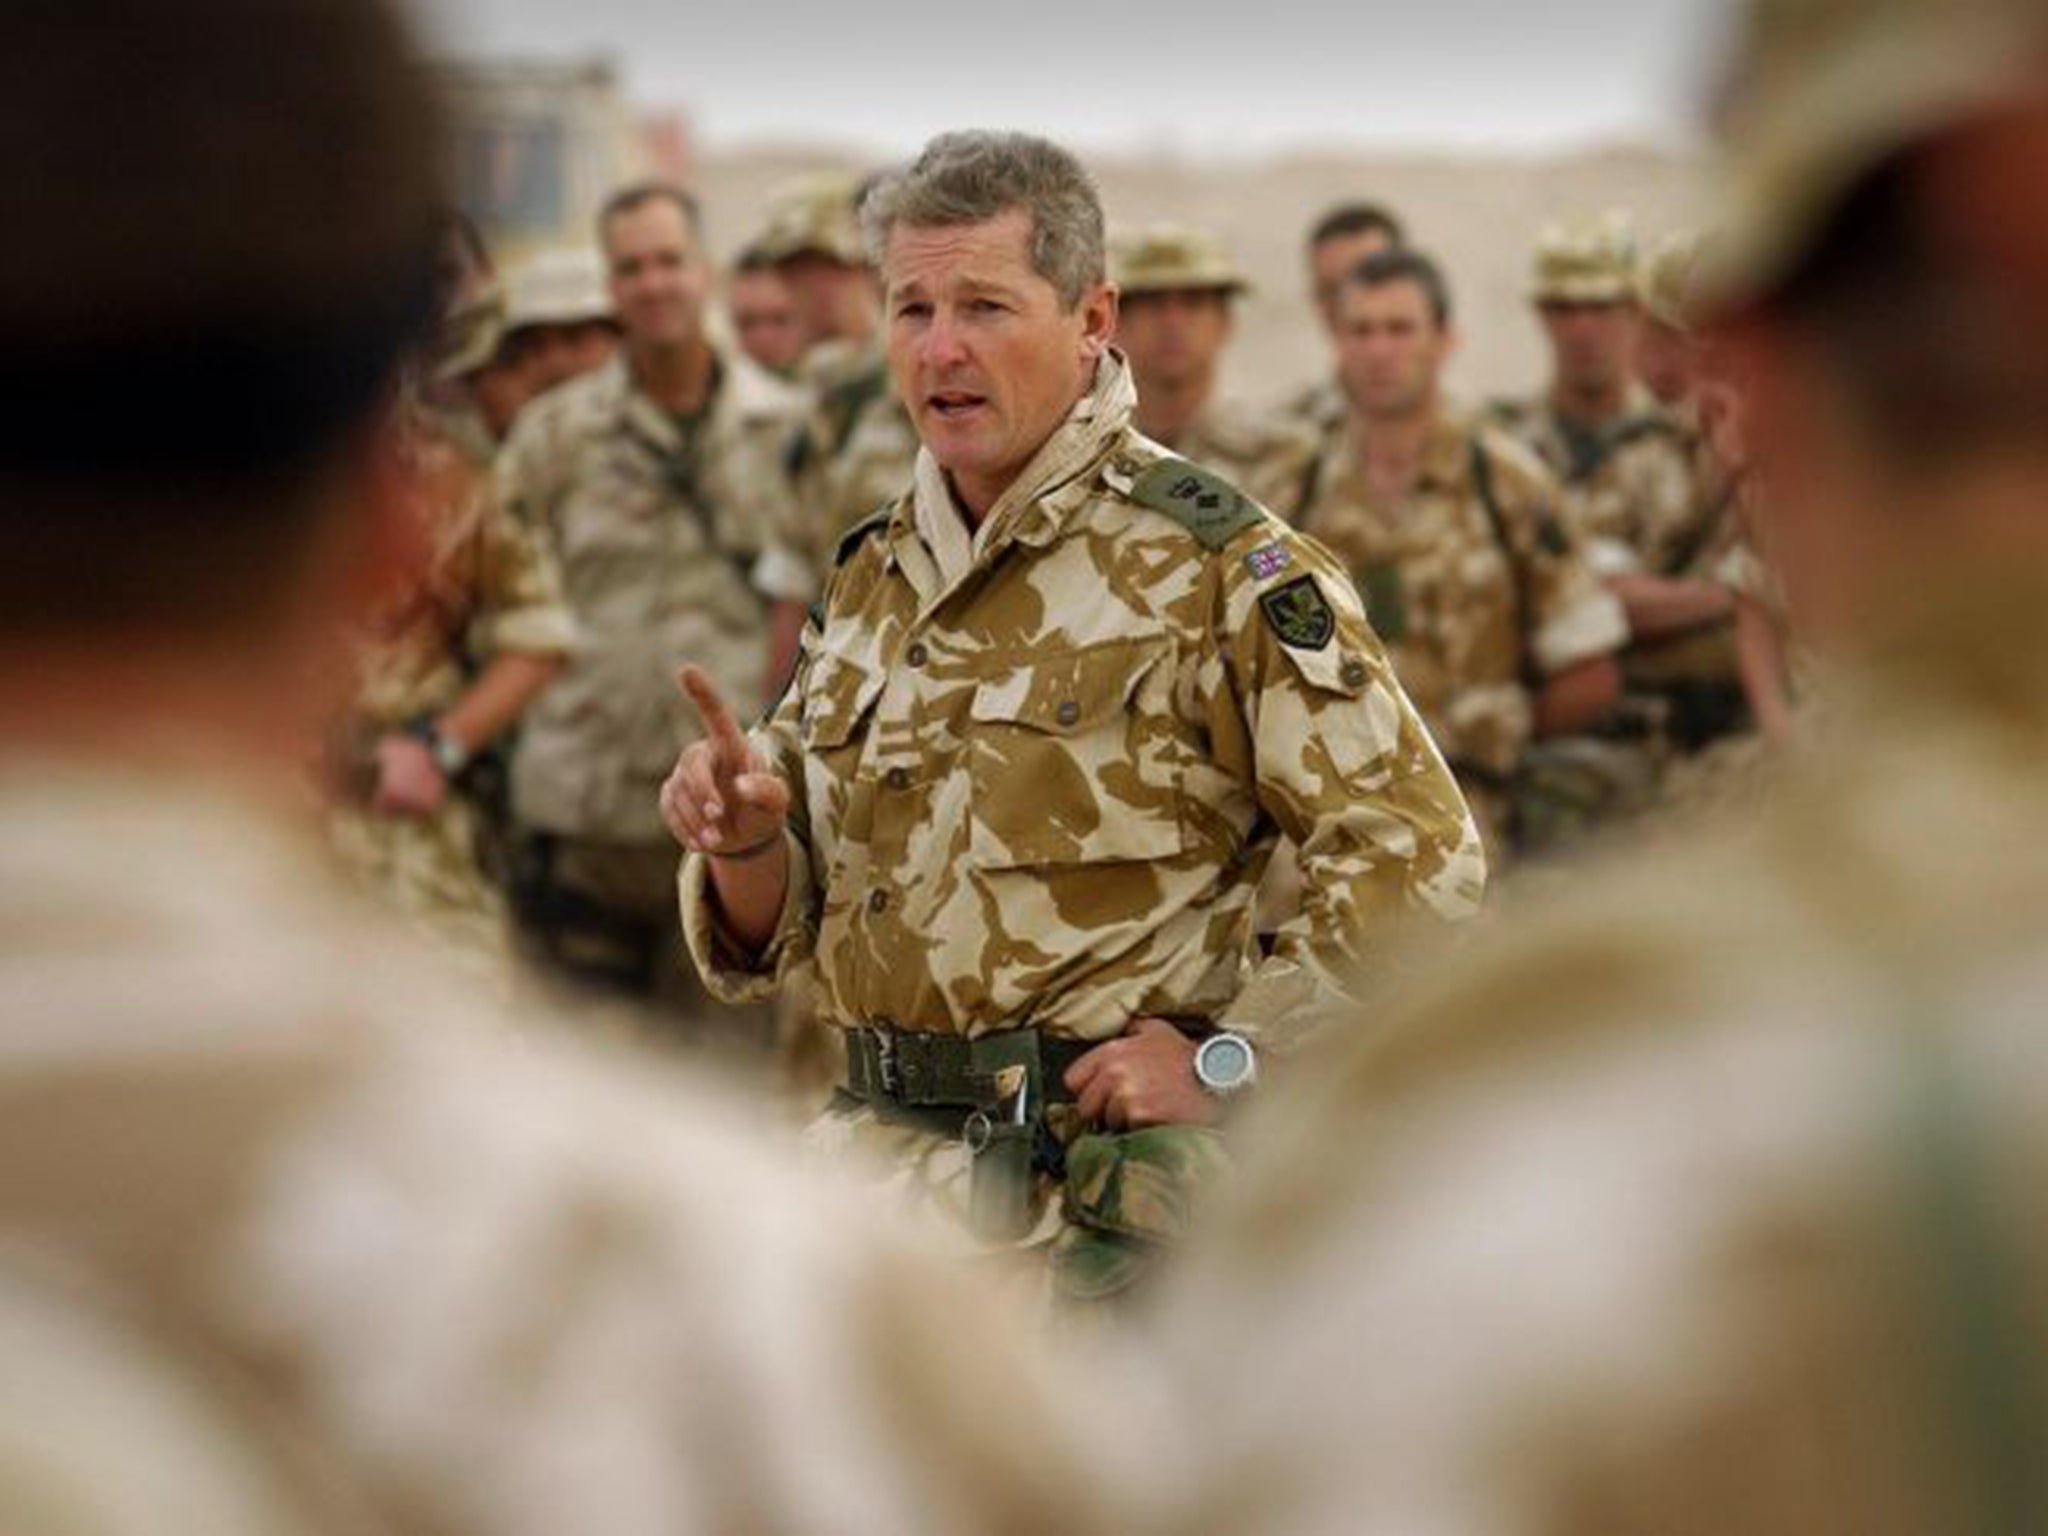 Colonel Tim Collins, who founded New Century two years after quitting the British Army in 2004